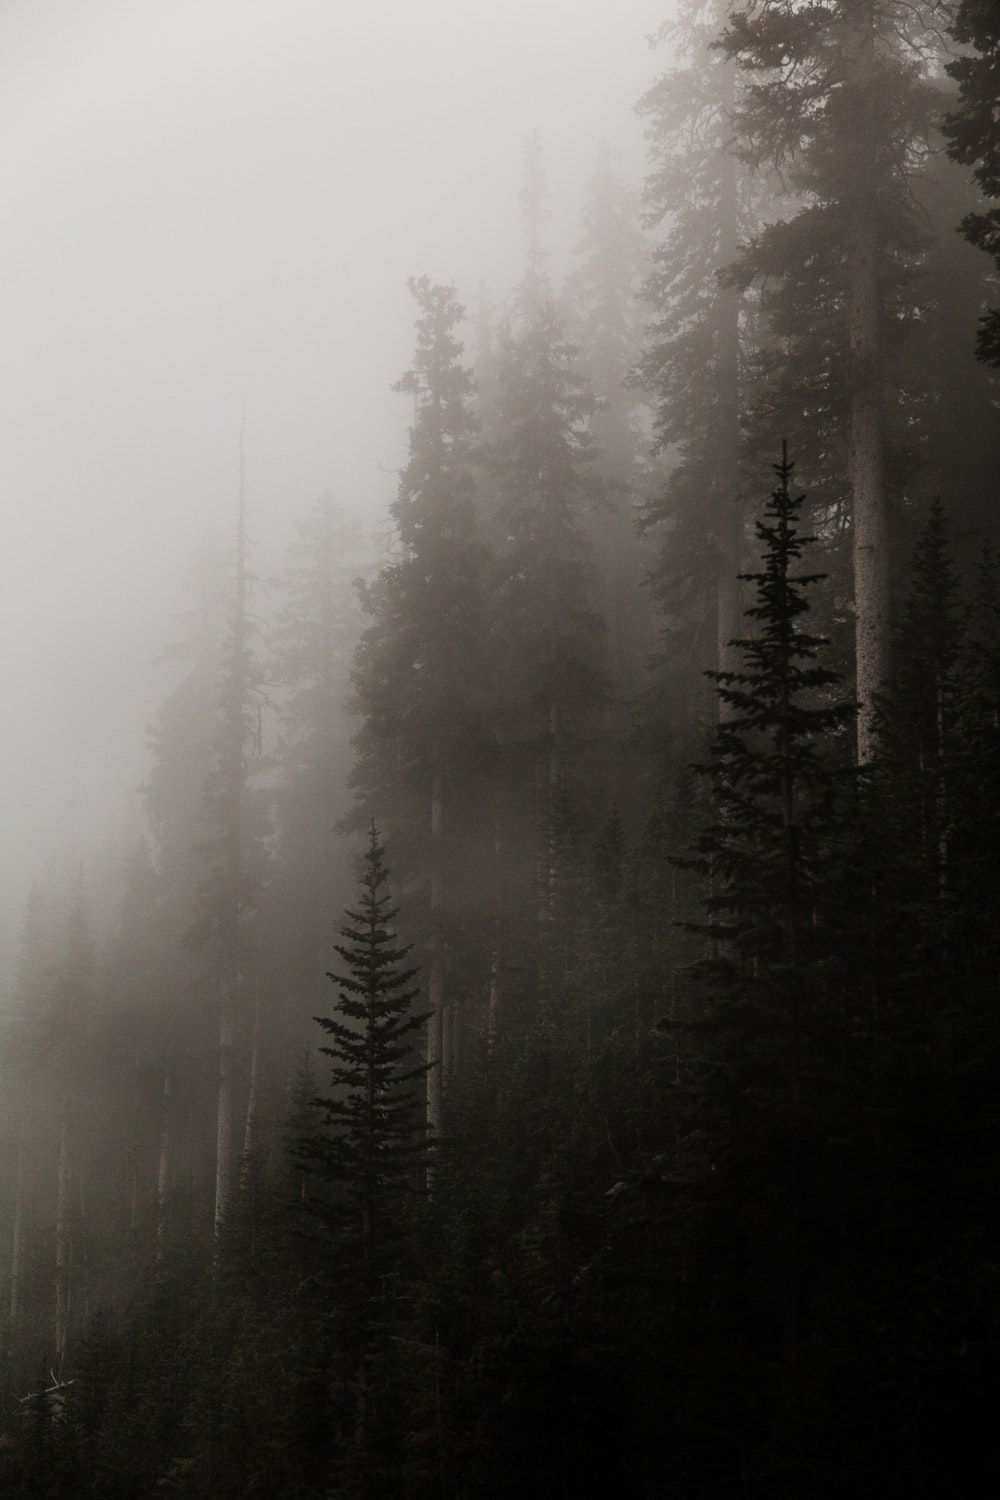 Fogy Forest Trees Wallpapers